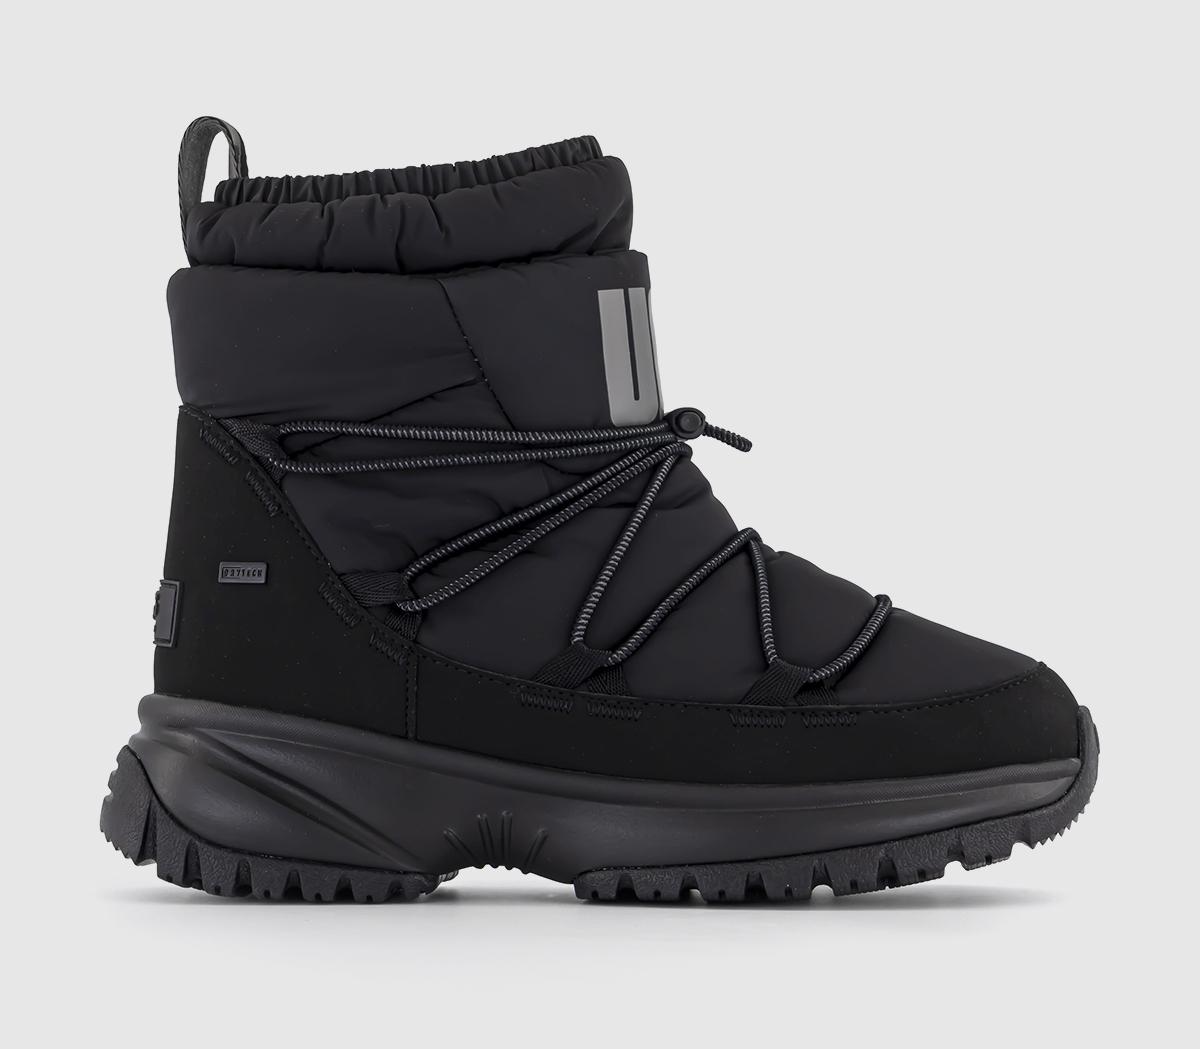 UGG Yose Puffer Mid Boots Black - Women's Ankle Boots